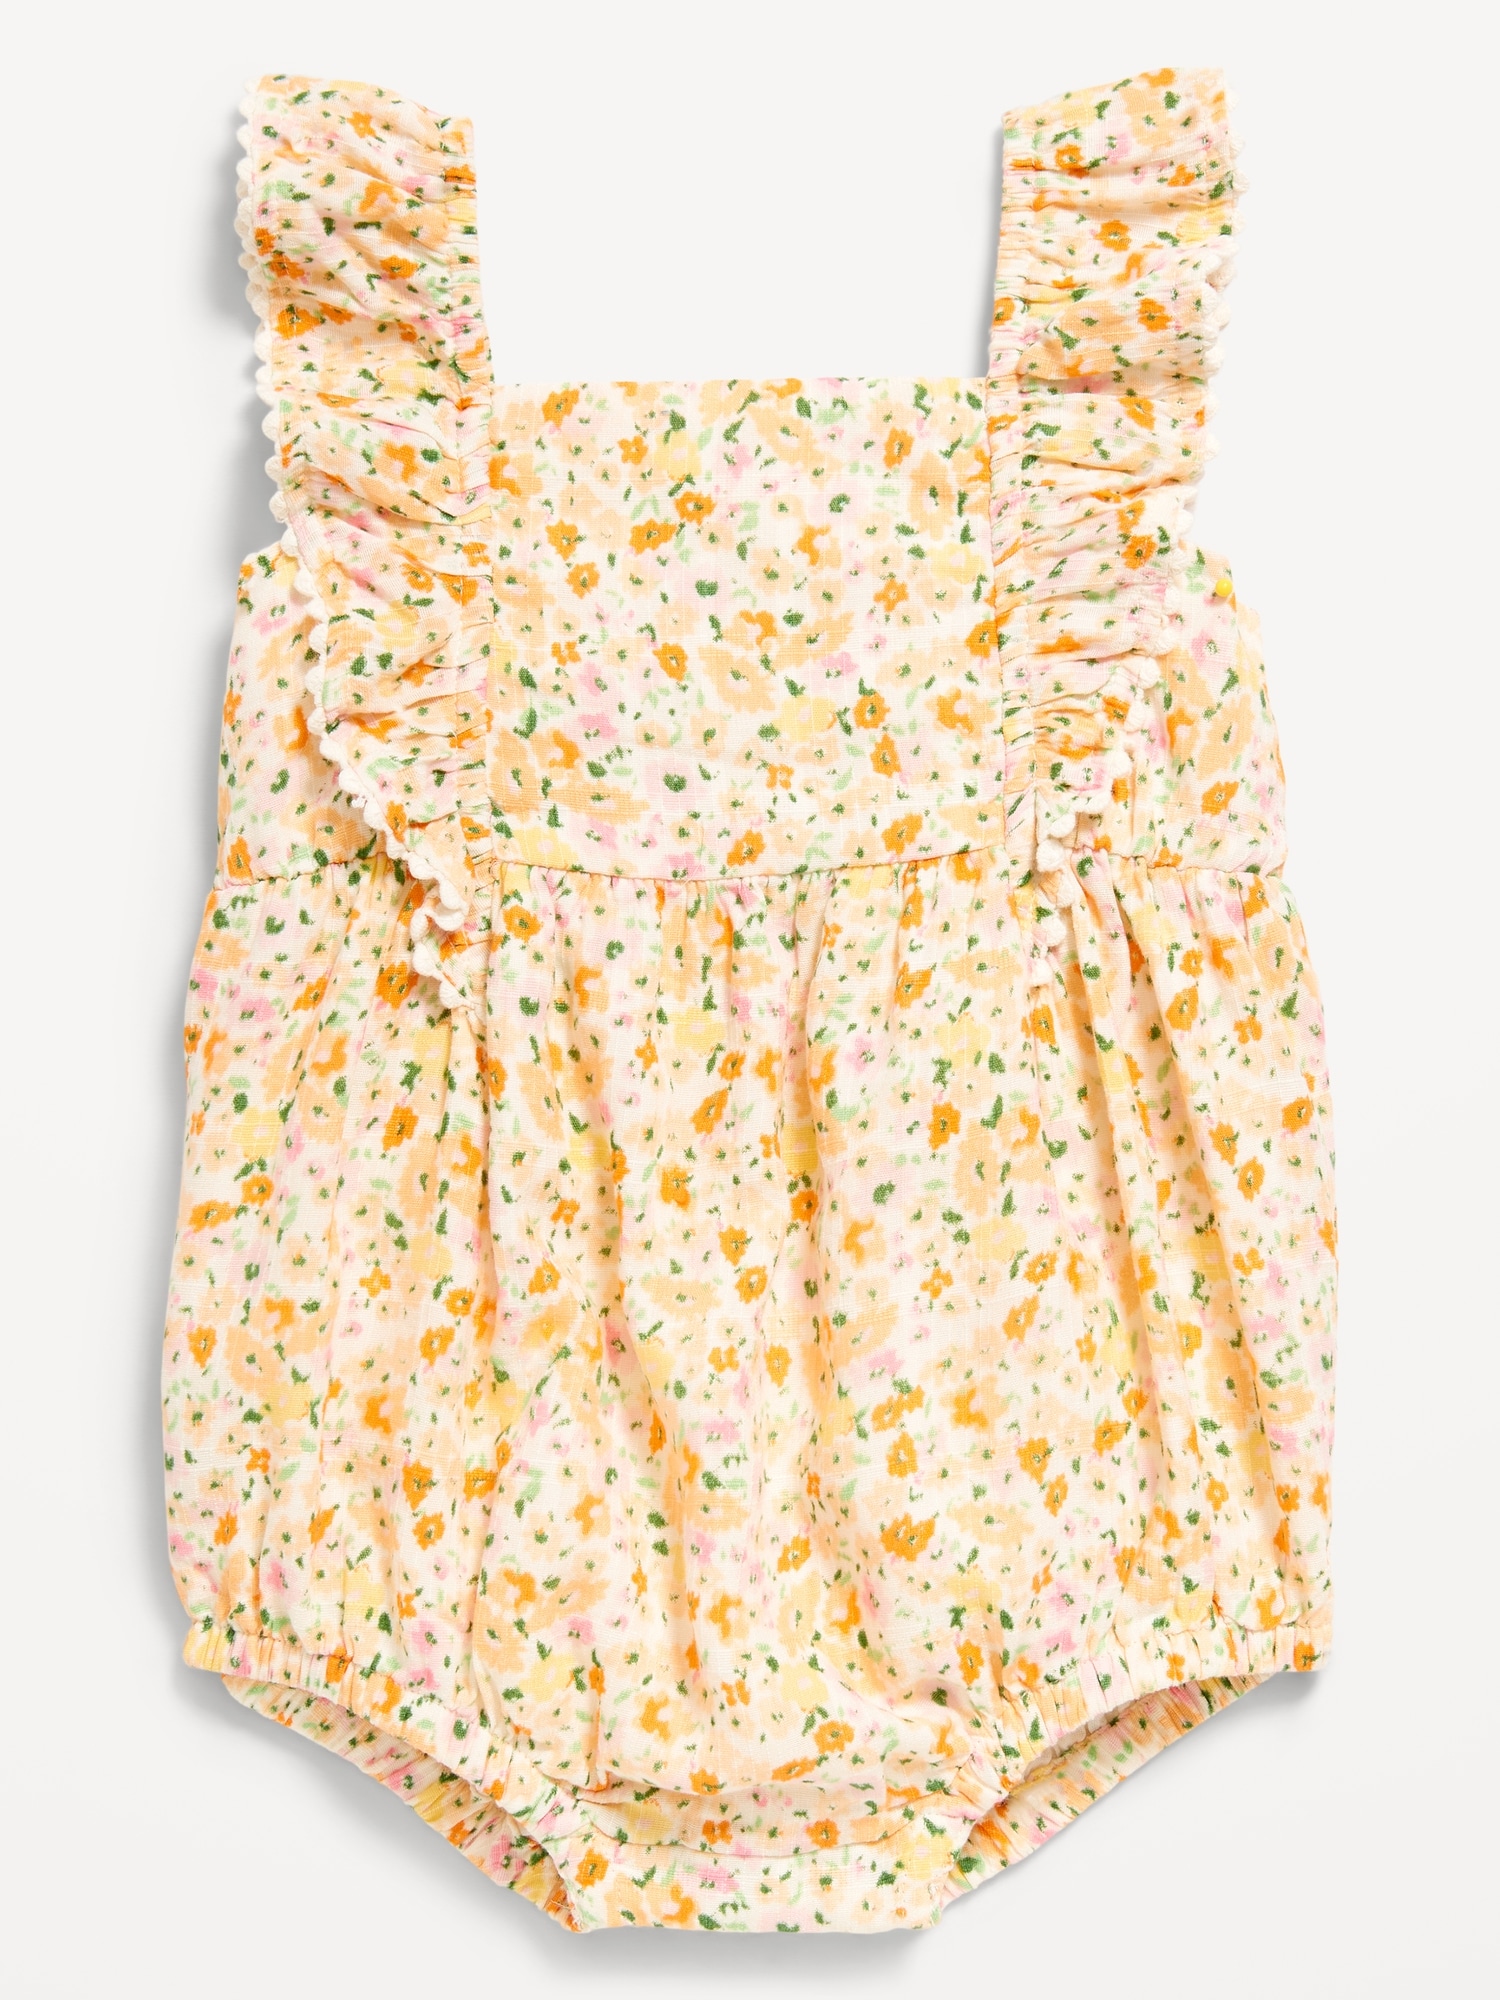 One-Piece Romper for Baby